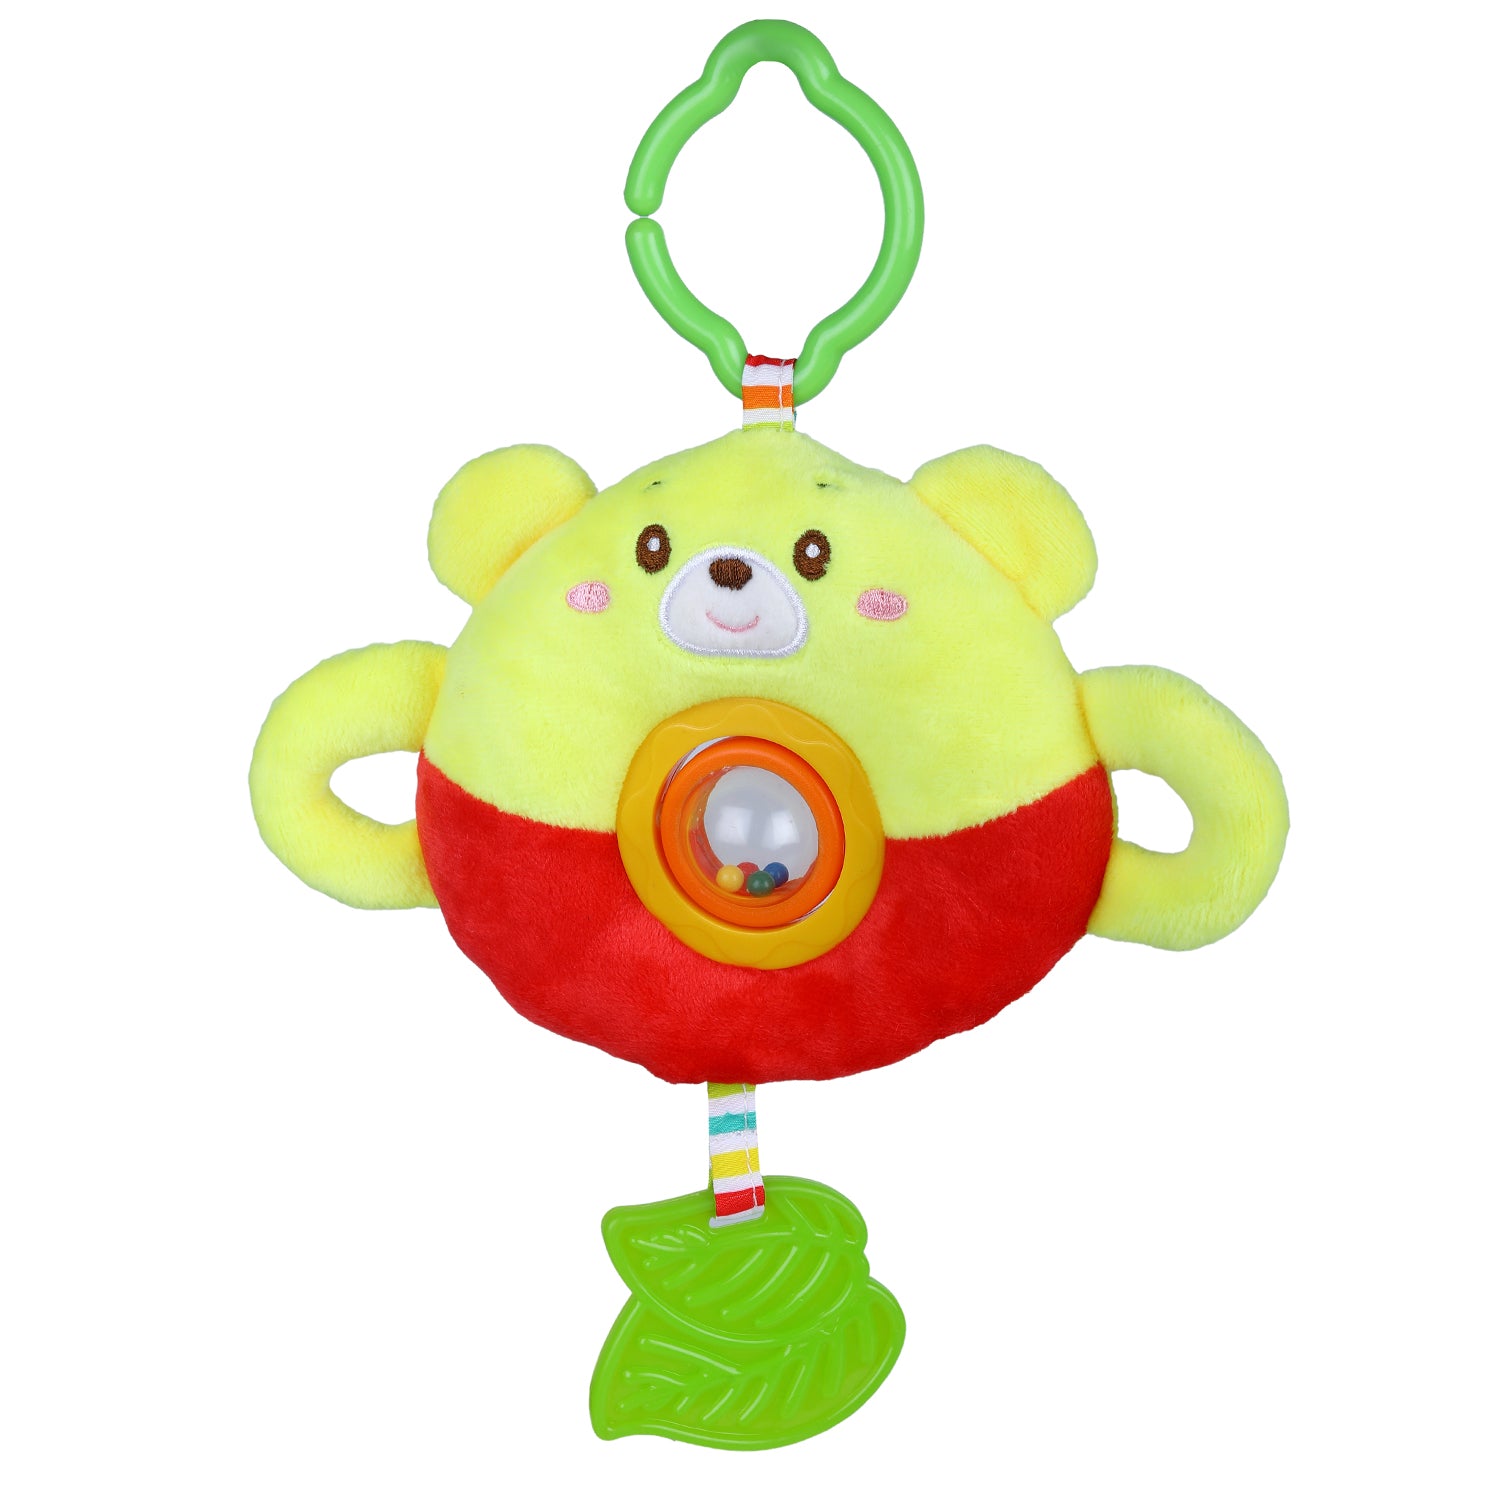 Bear Stroller Crib Hanging Plush Rattle Toy With Teether - Yellow - Baby Moo